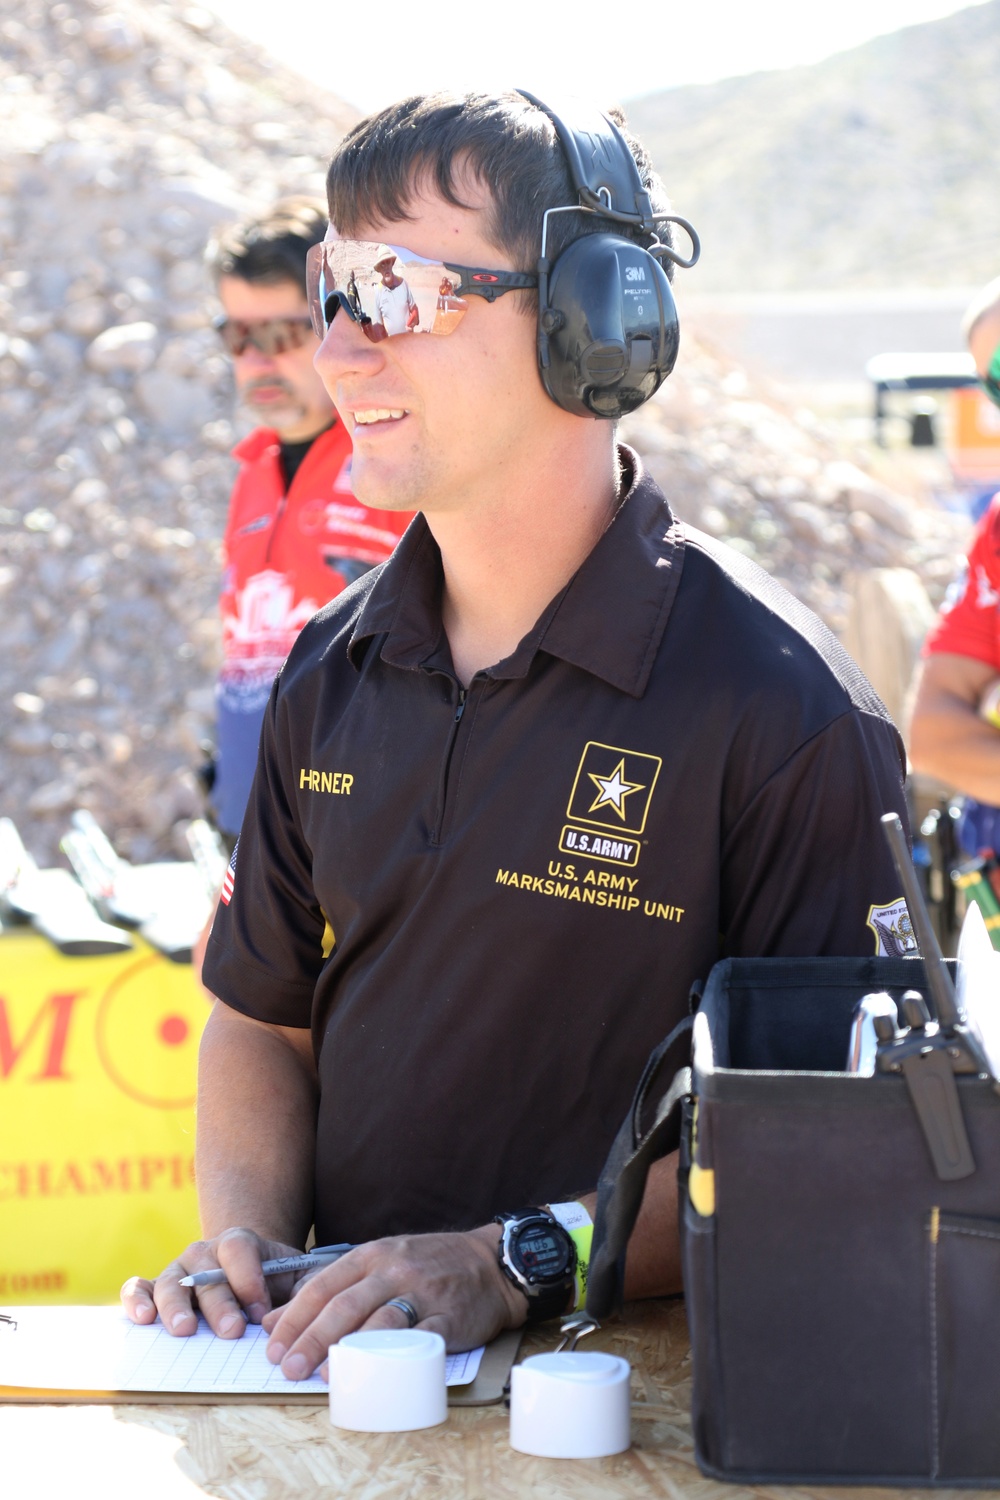 Army Soldier wins 10th national marksmanship title